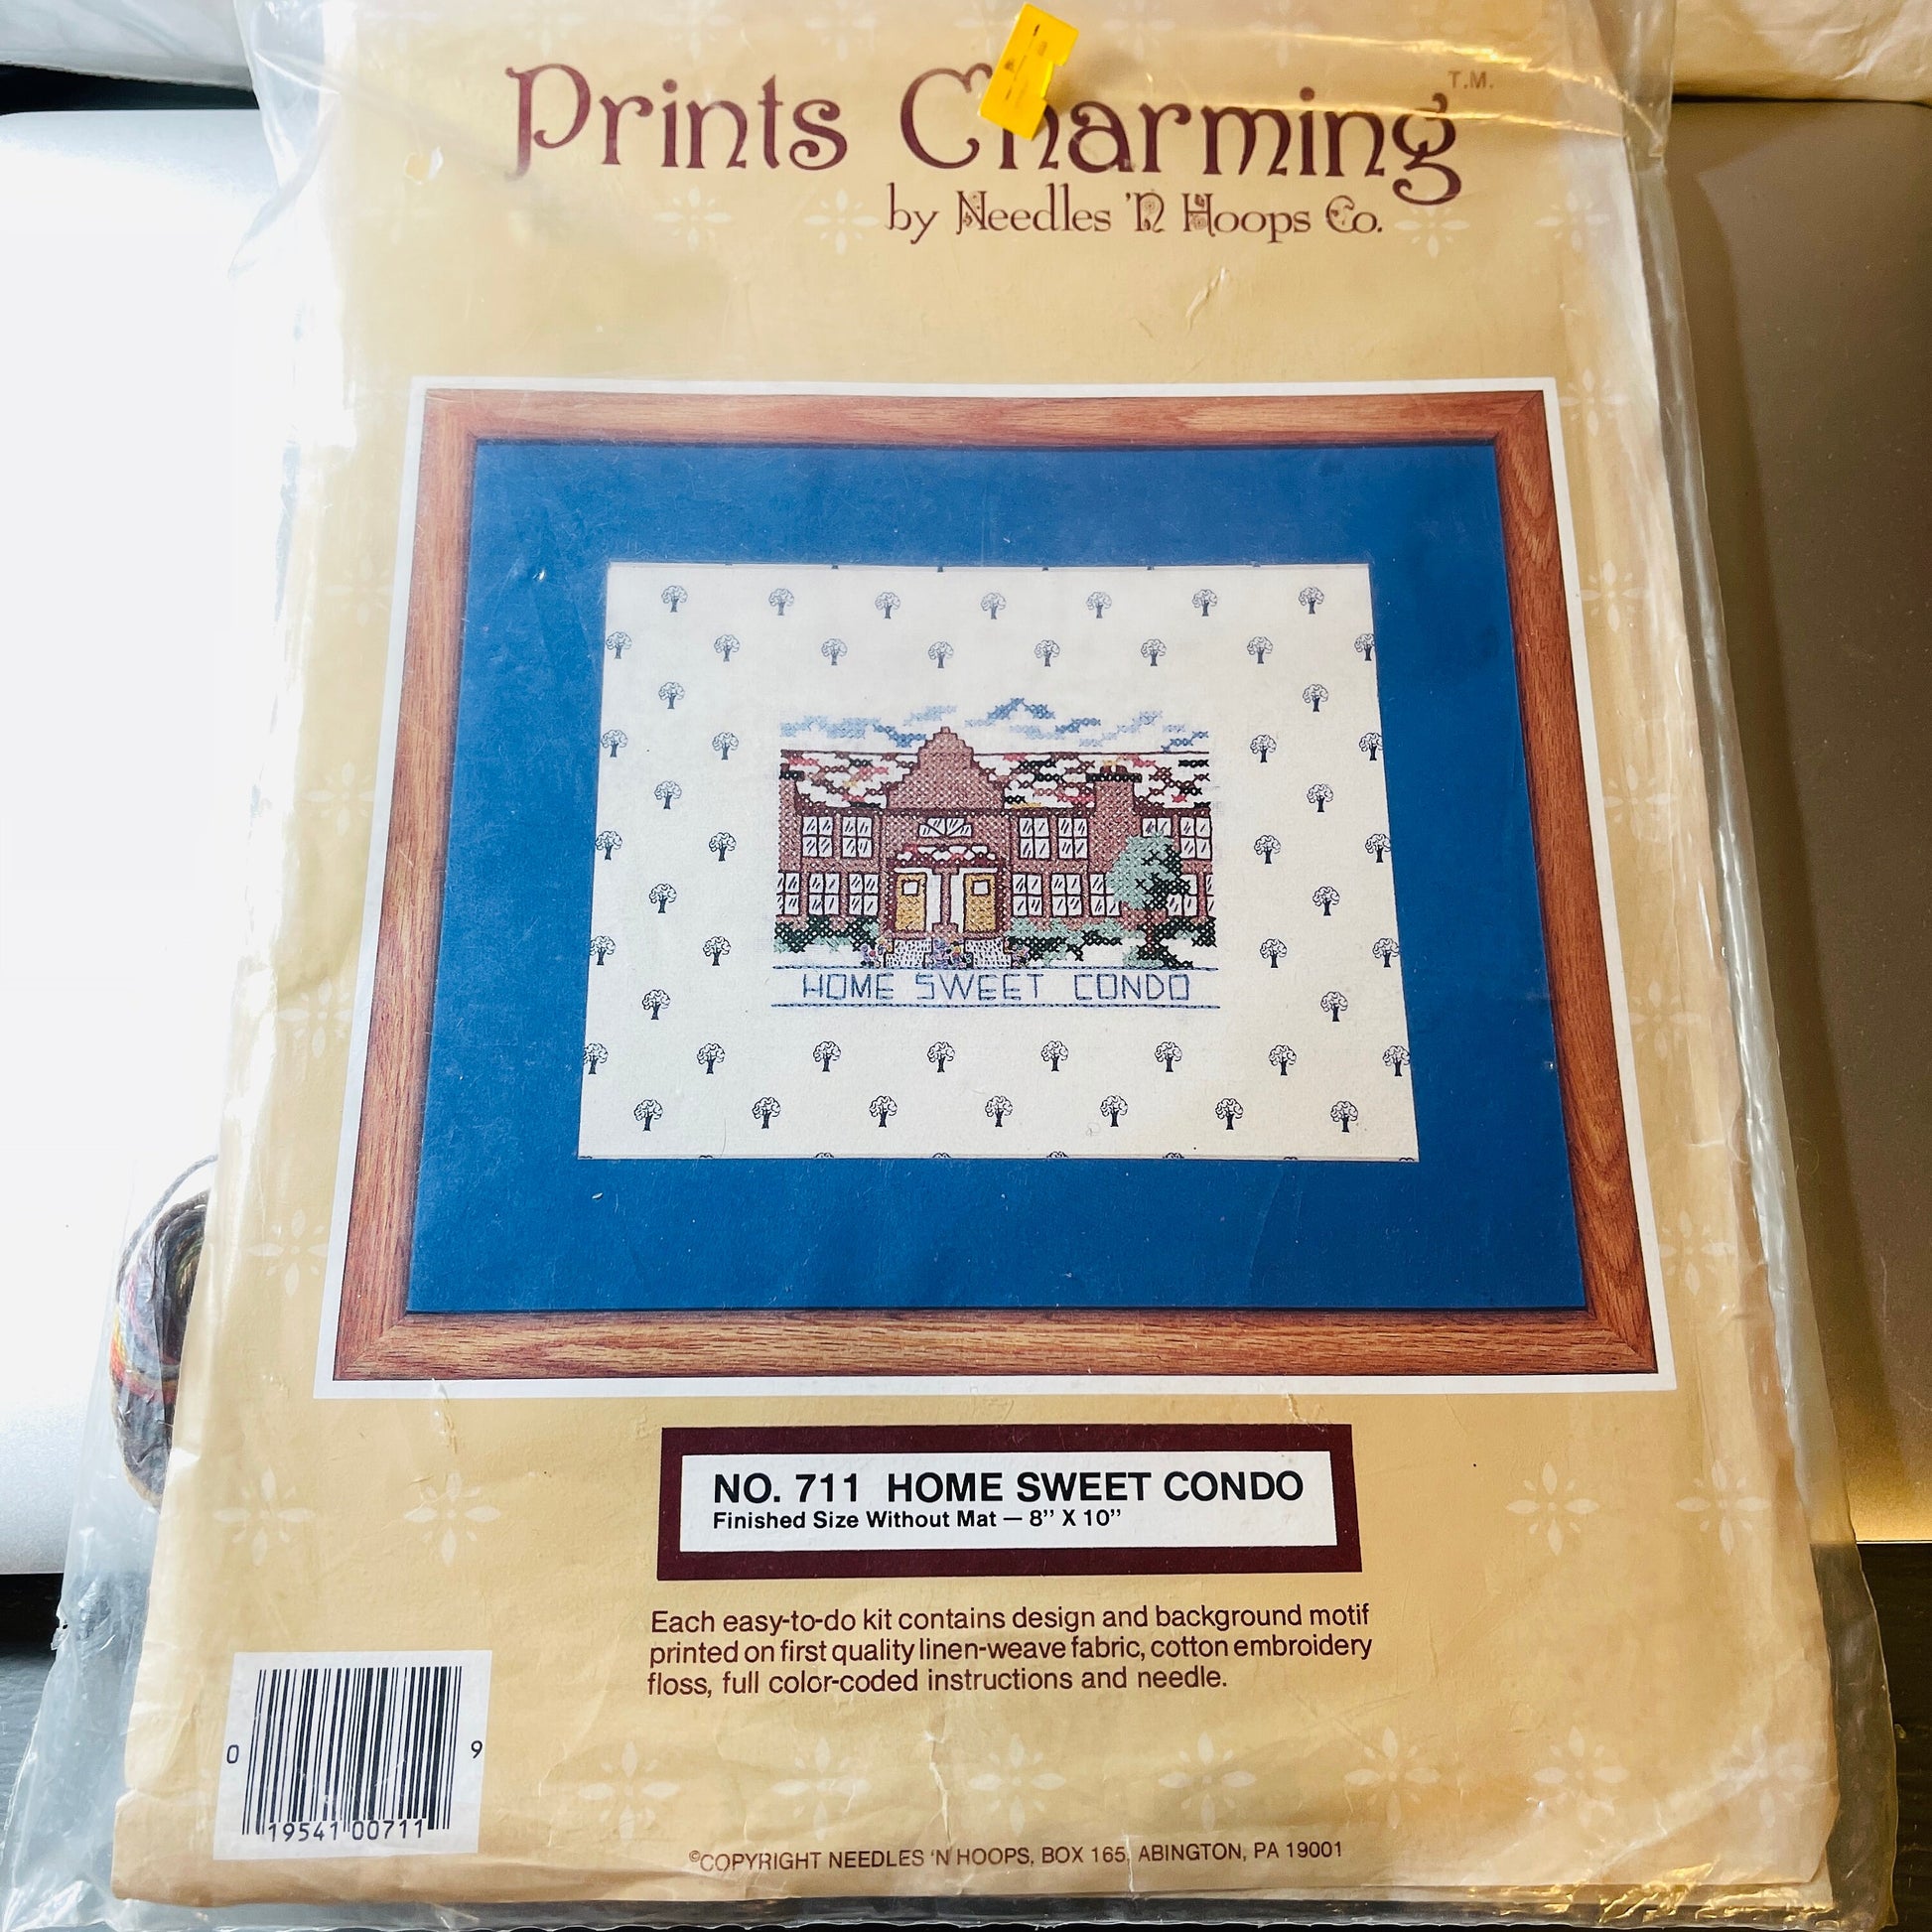 Needles N' Hoops, Prince Charming, Home Sweet Condo, No 711, Stamped Cross Stitch Kit